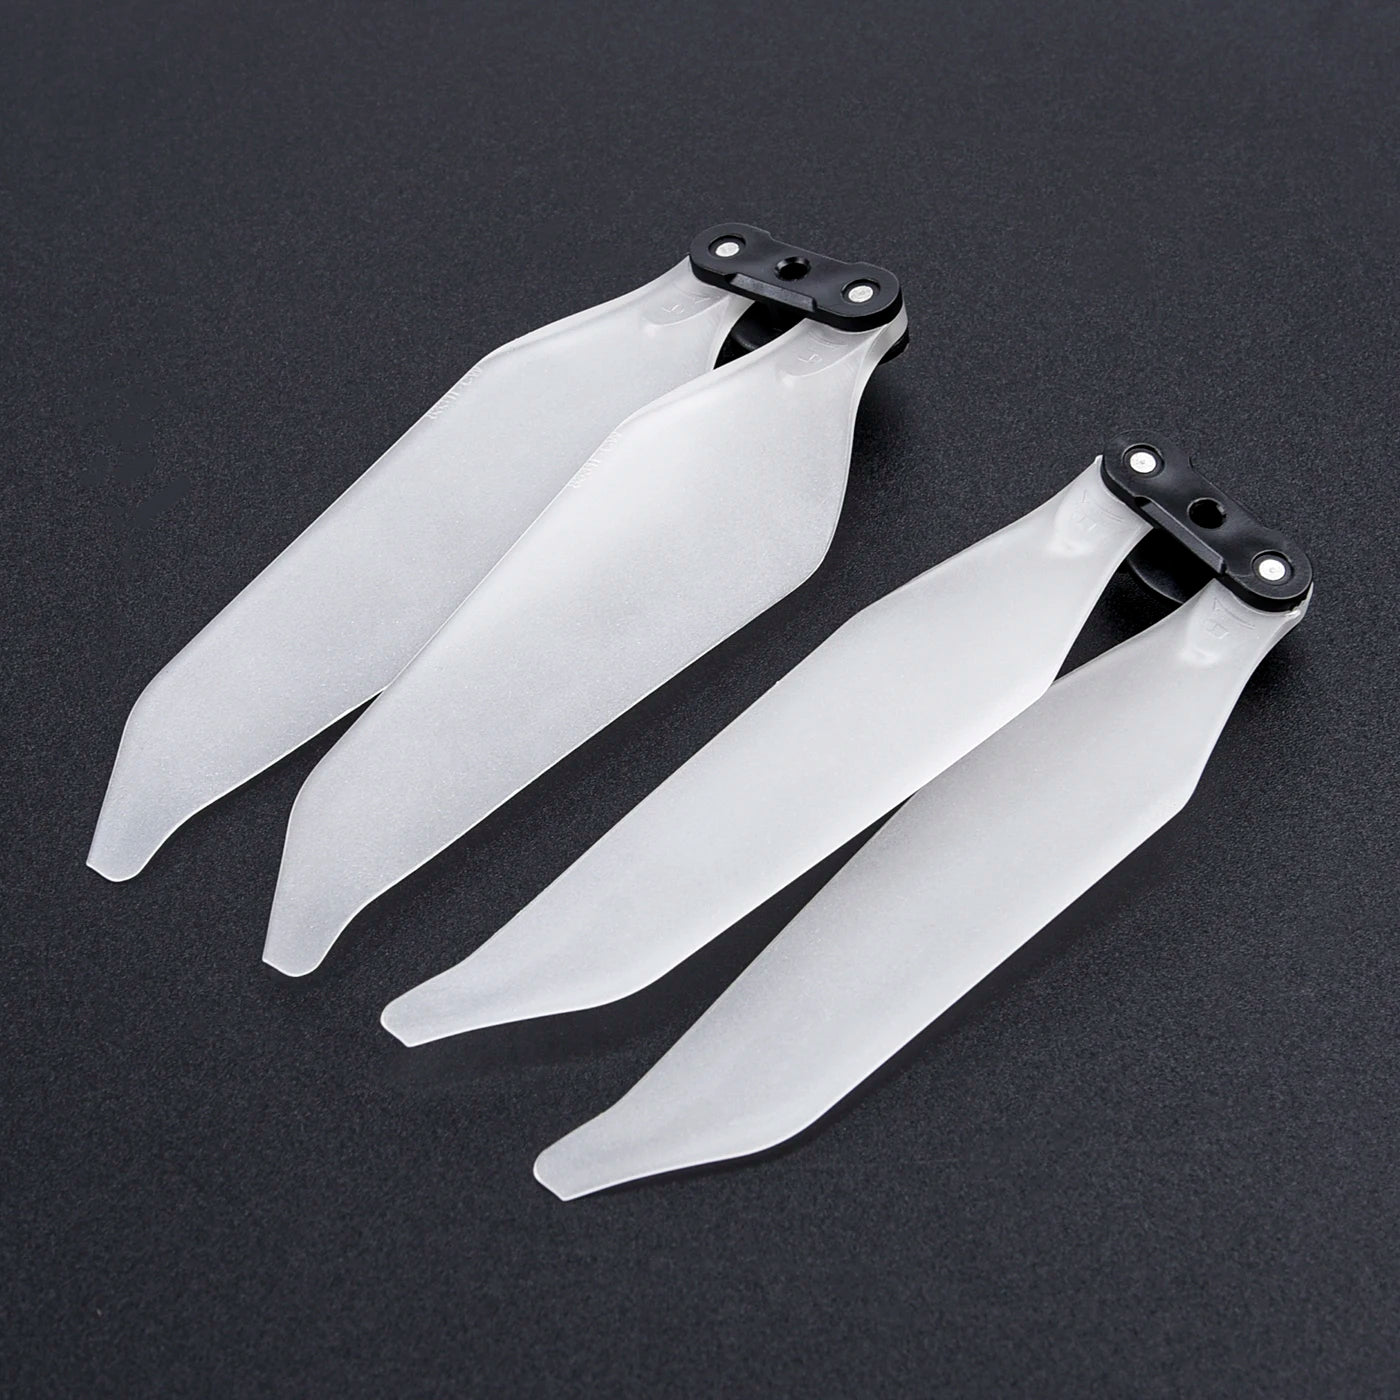 8331 8331F Low Noise Propeller, 8331 low noise propeller used for DJI Mavic Pro PLATINUM Drone